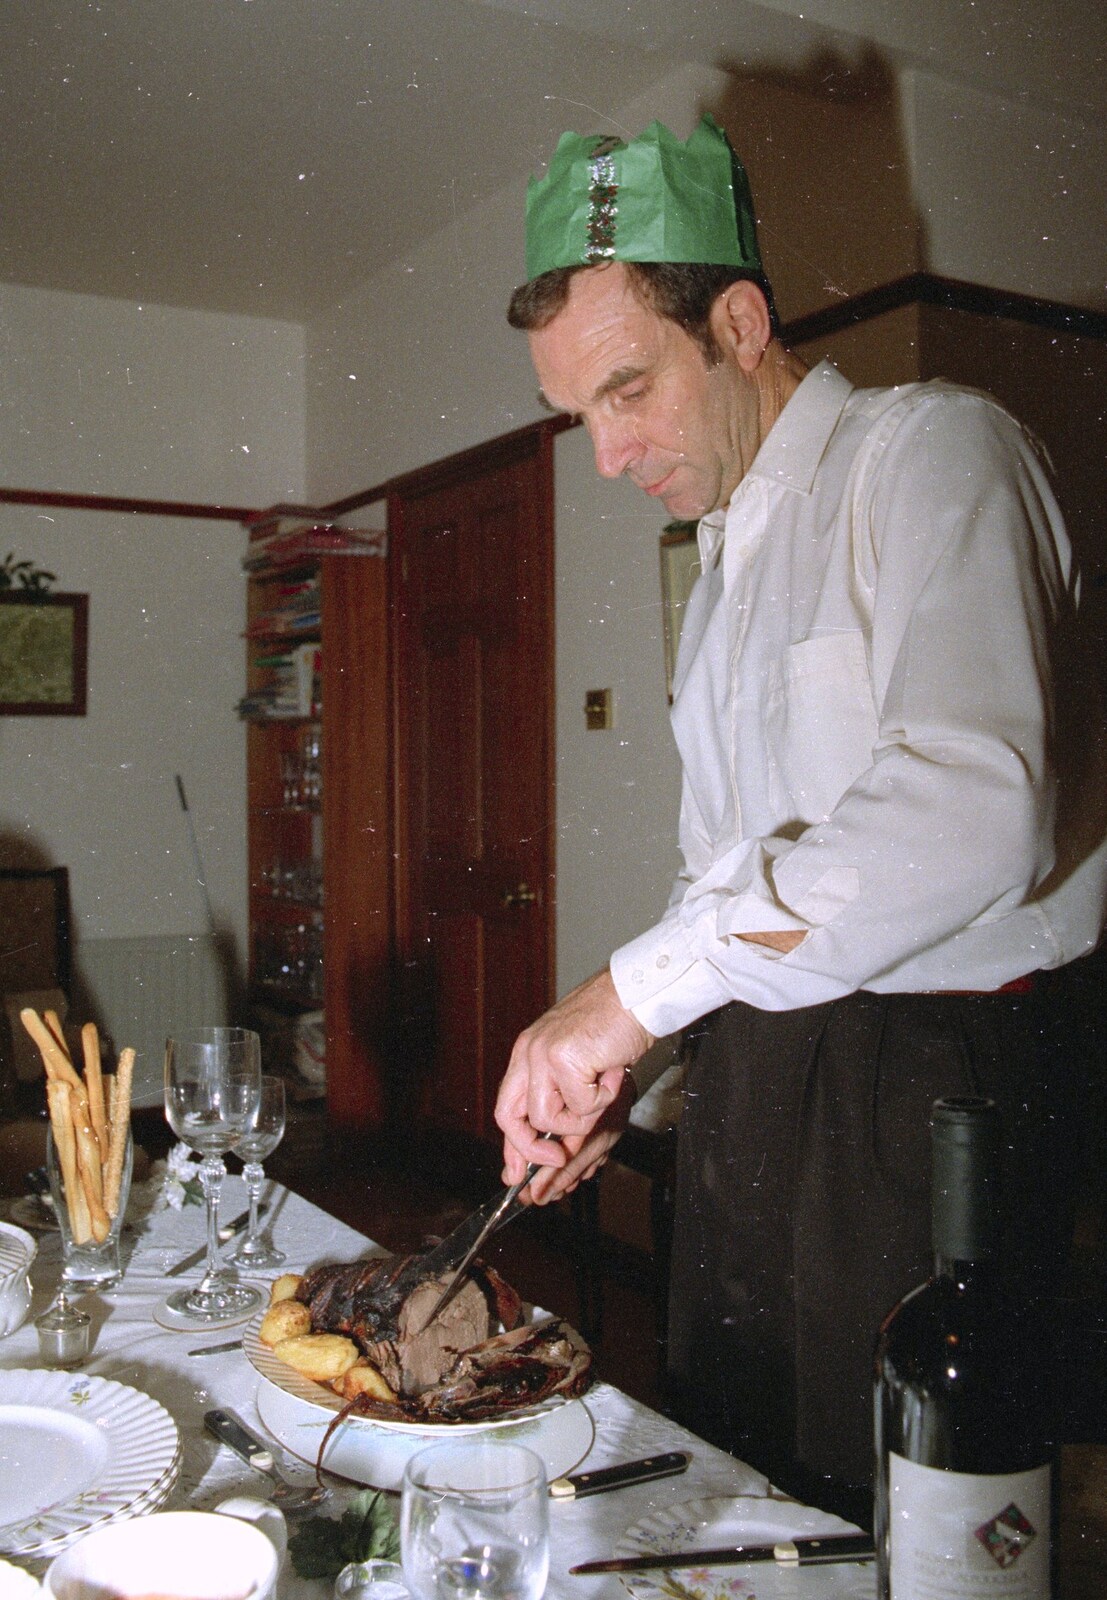 Mike carves up some meat from Christmas in Devon and Stuston - 25th December 1991